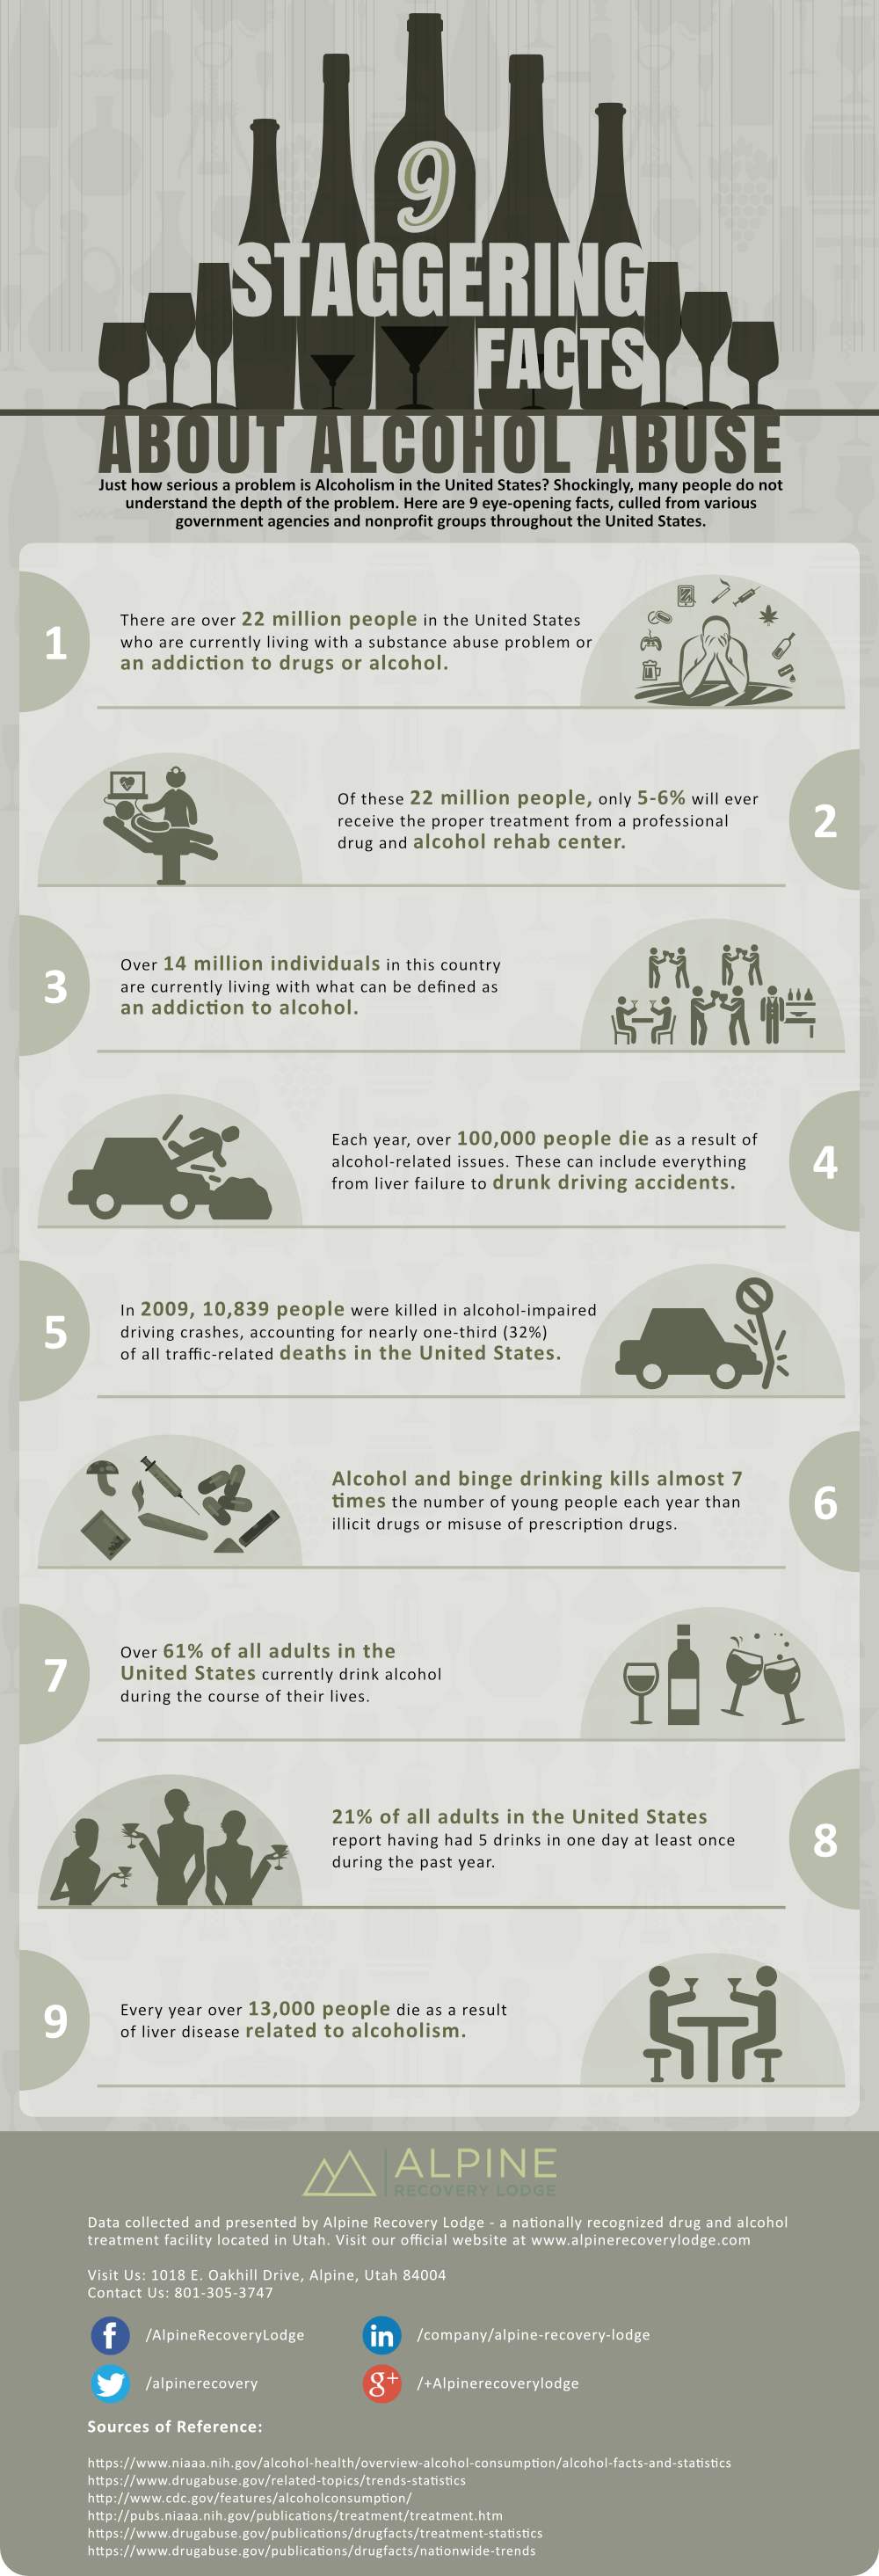 9 Staggering Facts about Alcohol Abuse infographic